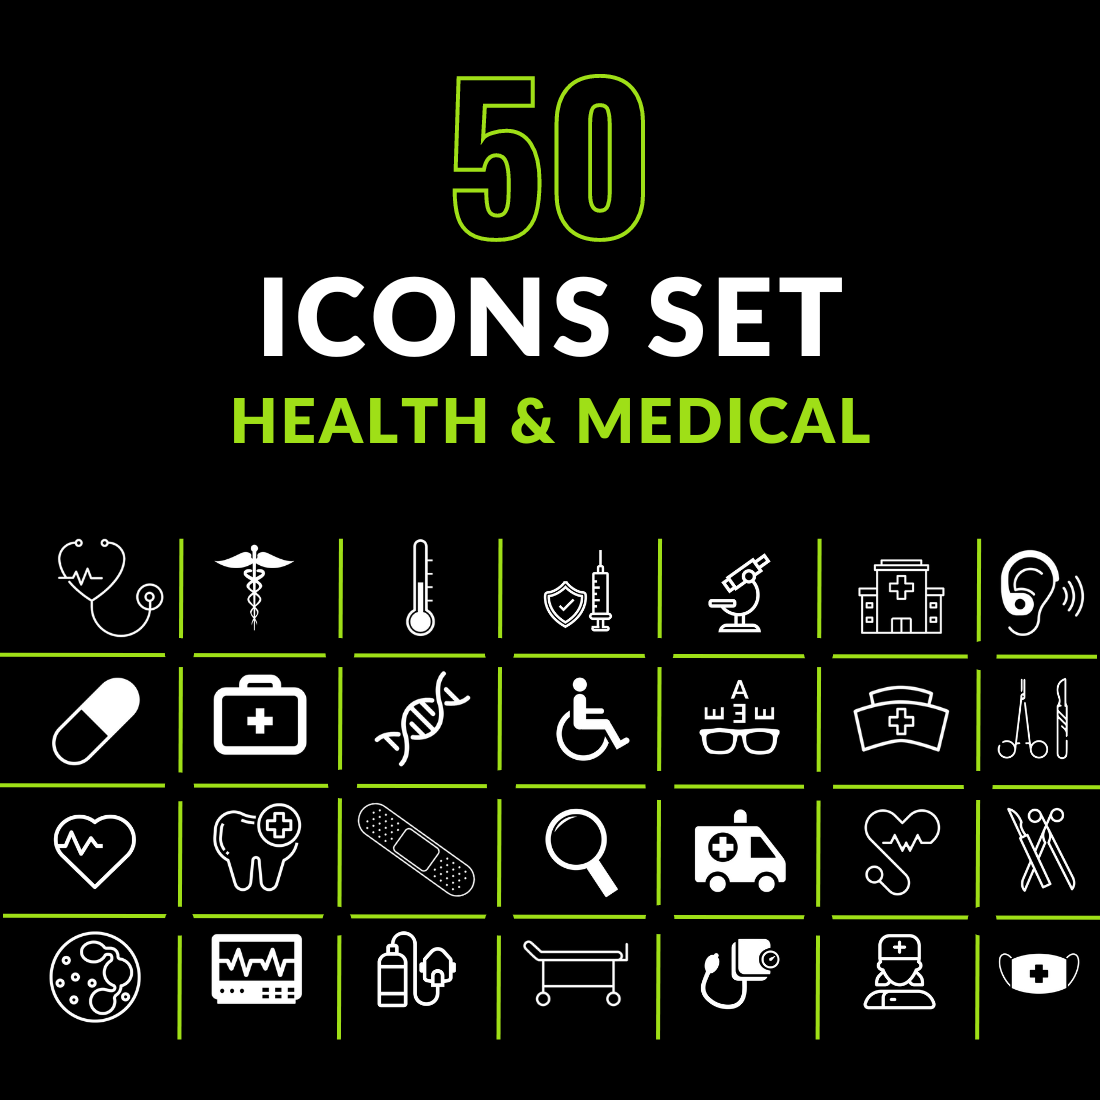 High-Quality Healthcare Icons cover image.